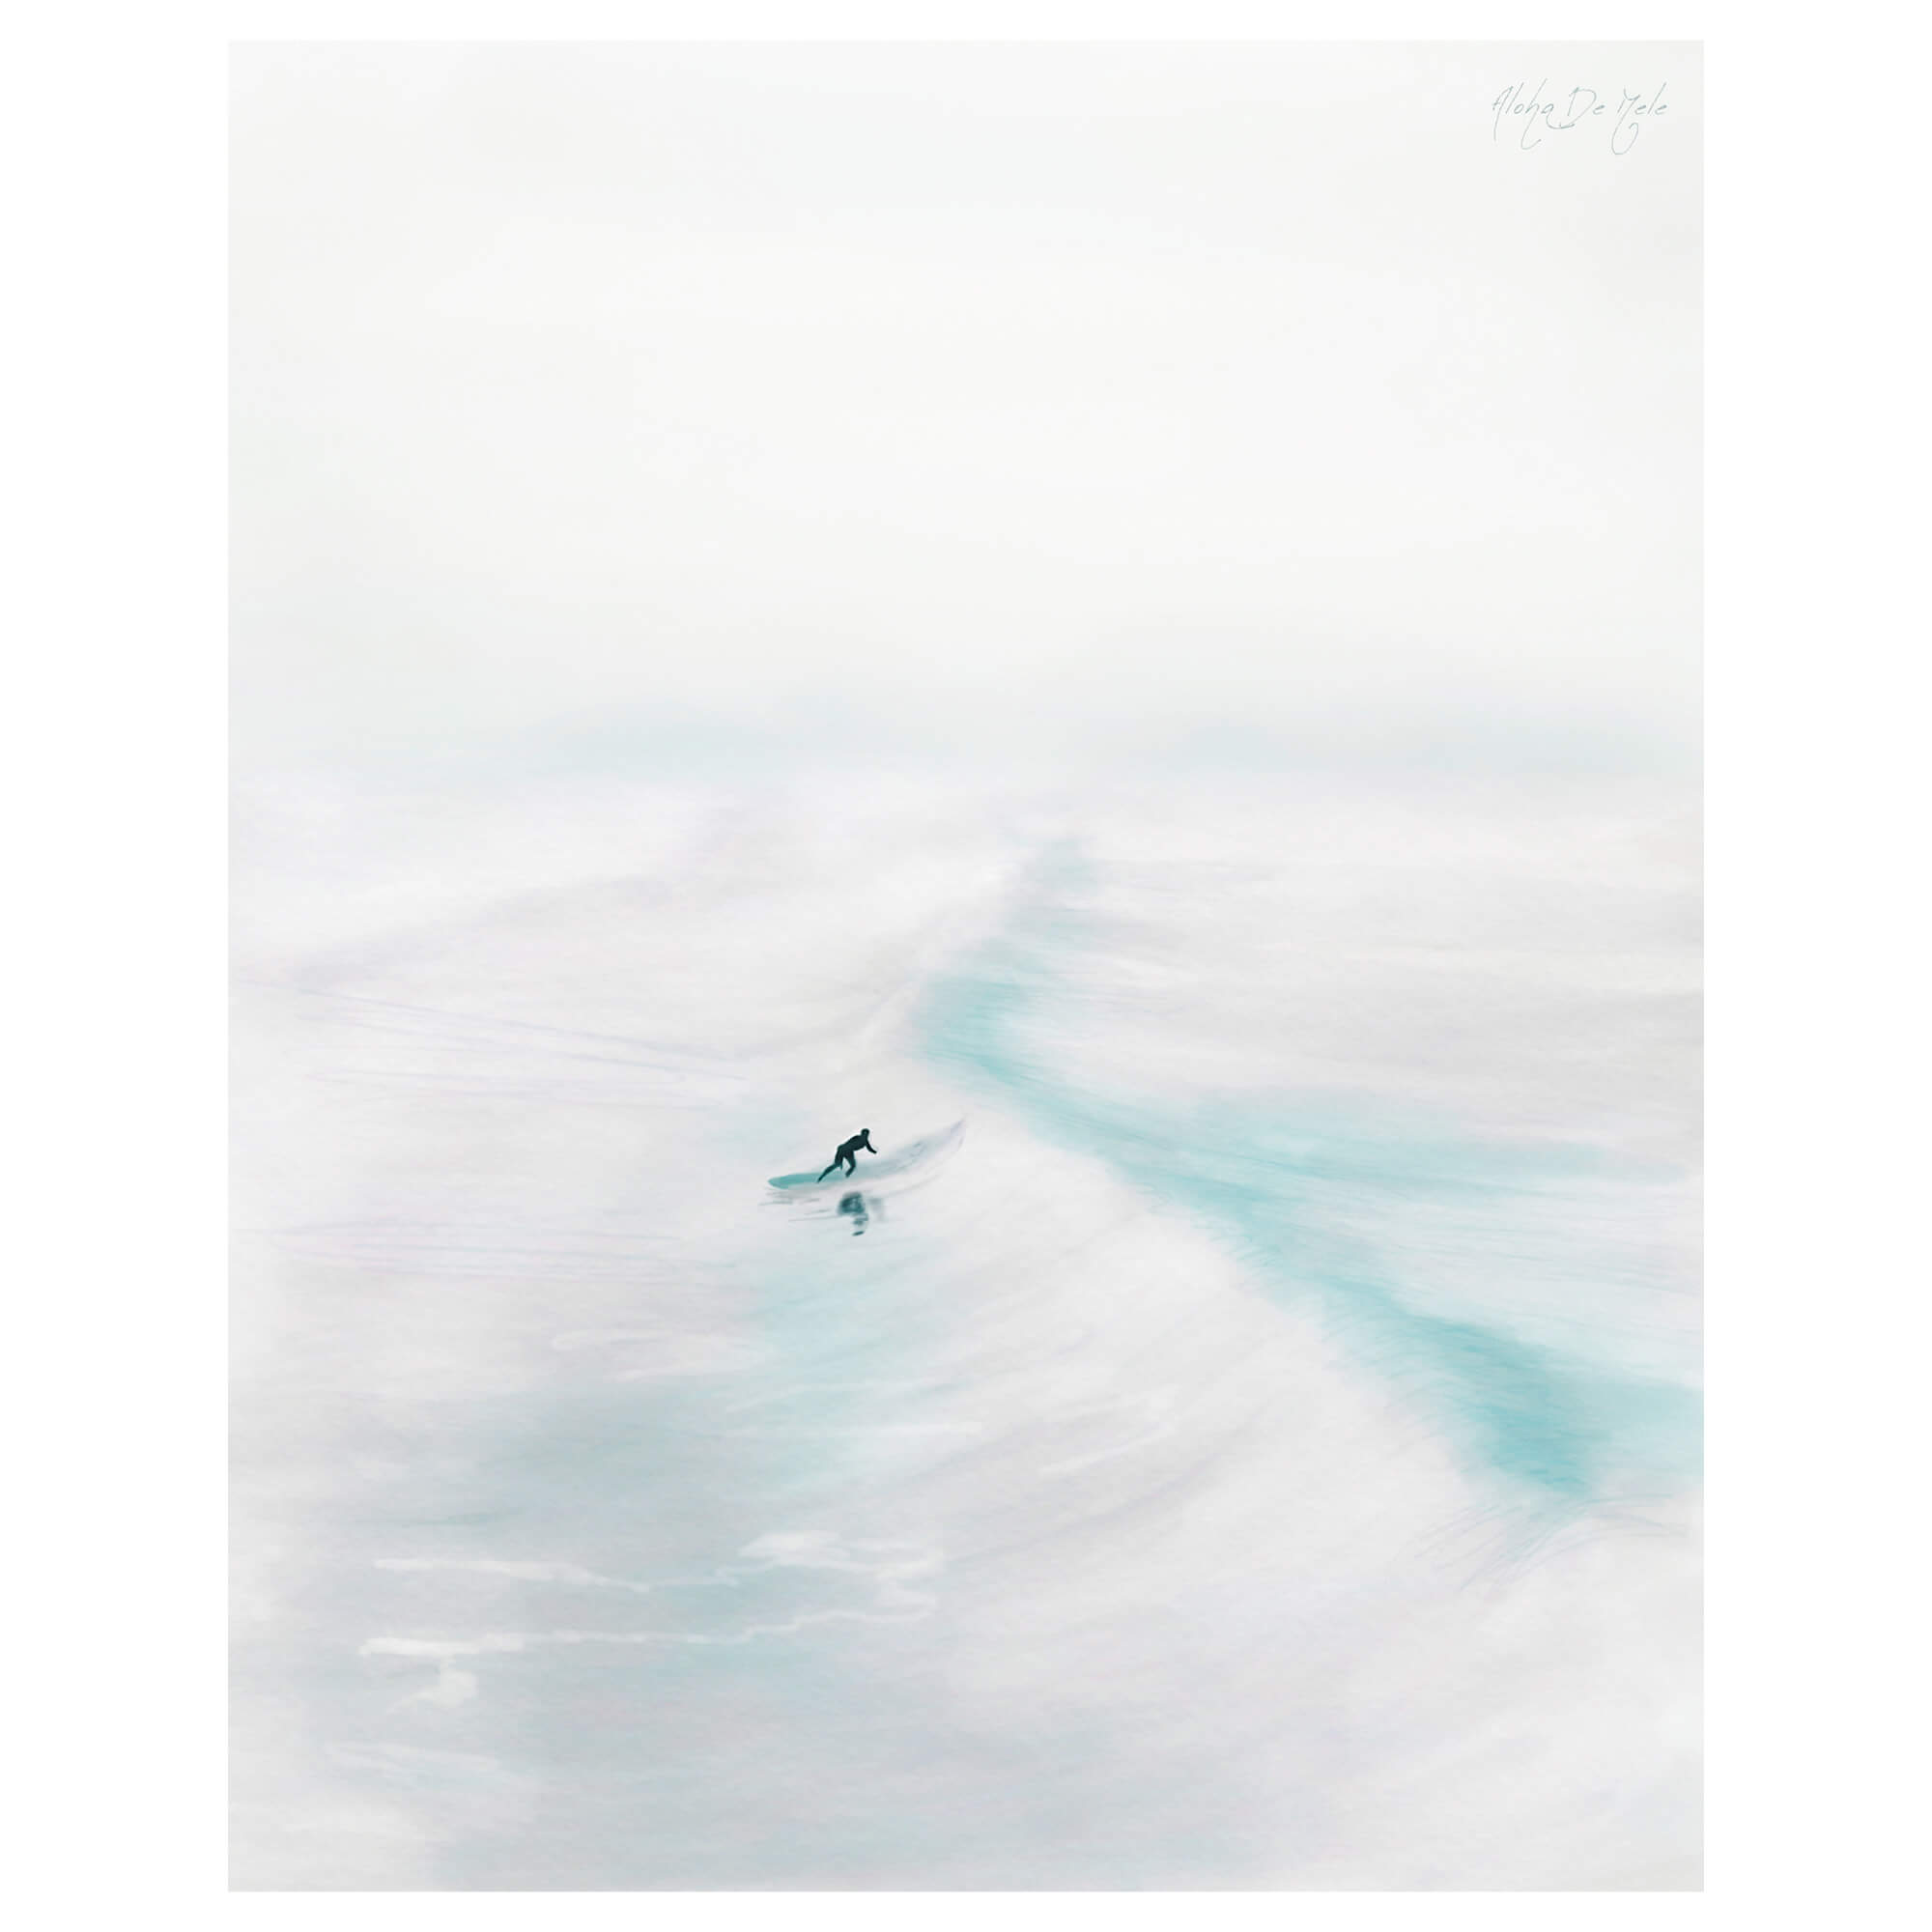 A matted art print of a surfer riding the epic waves of Hawaii by Hawaii artist Aloha De Mele